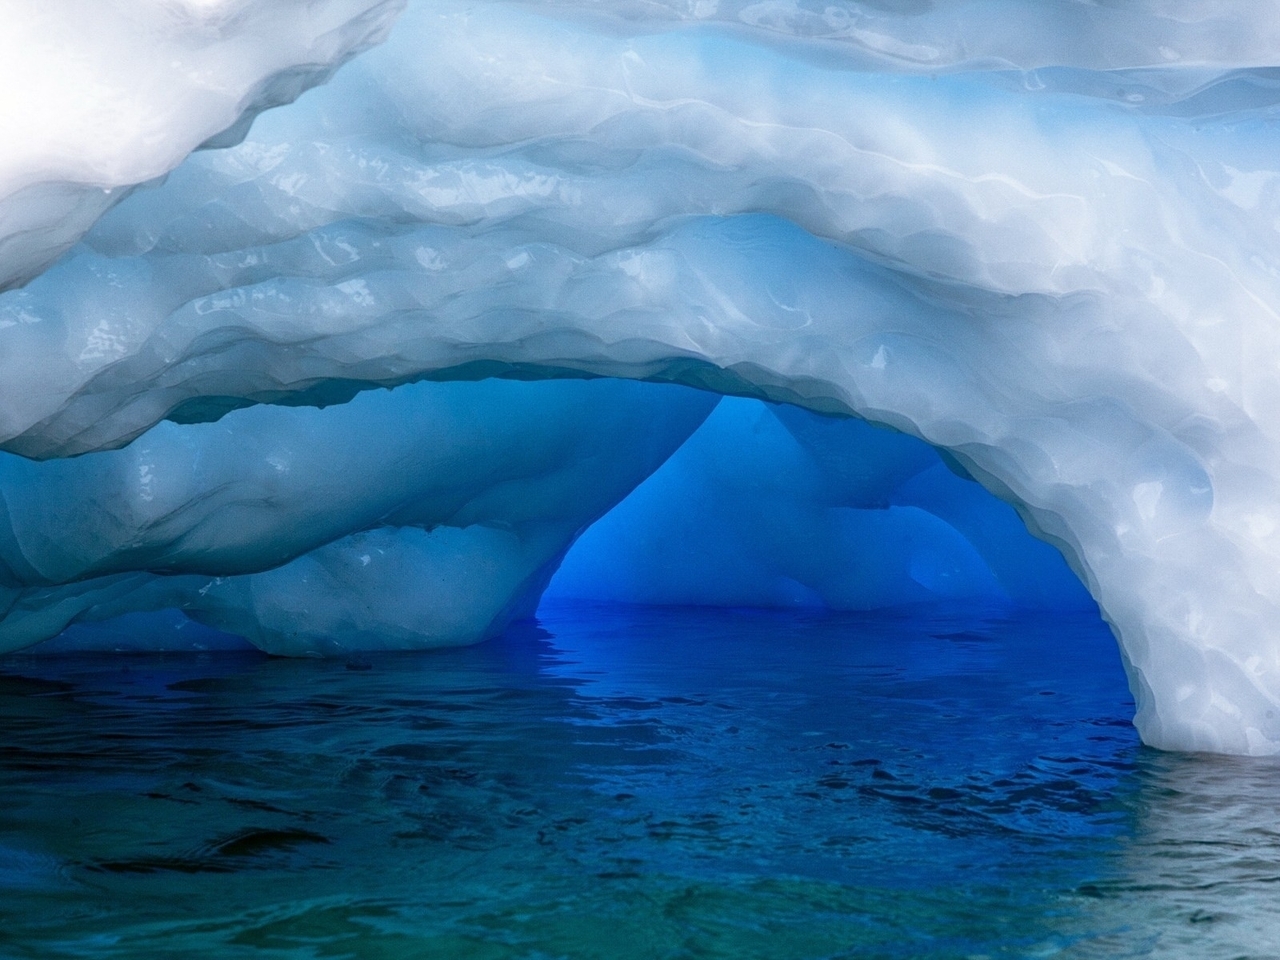 Image: Ice, water, cave, surface